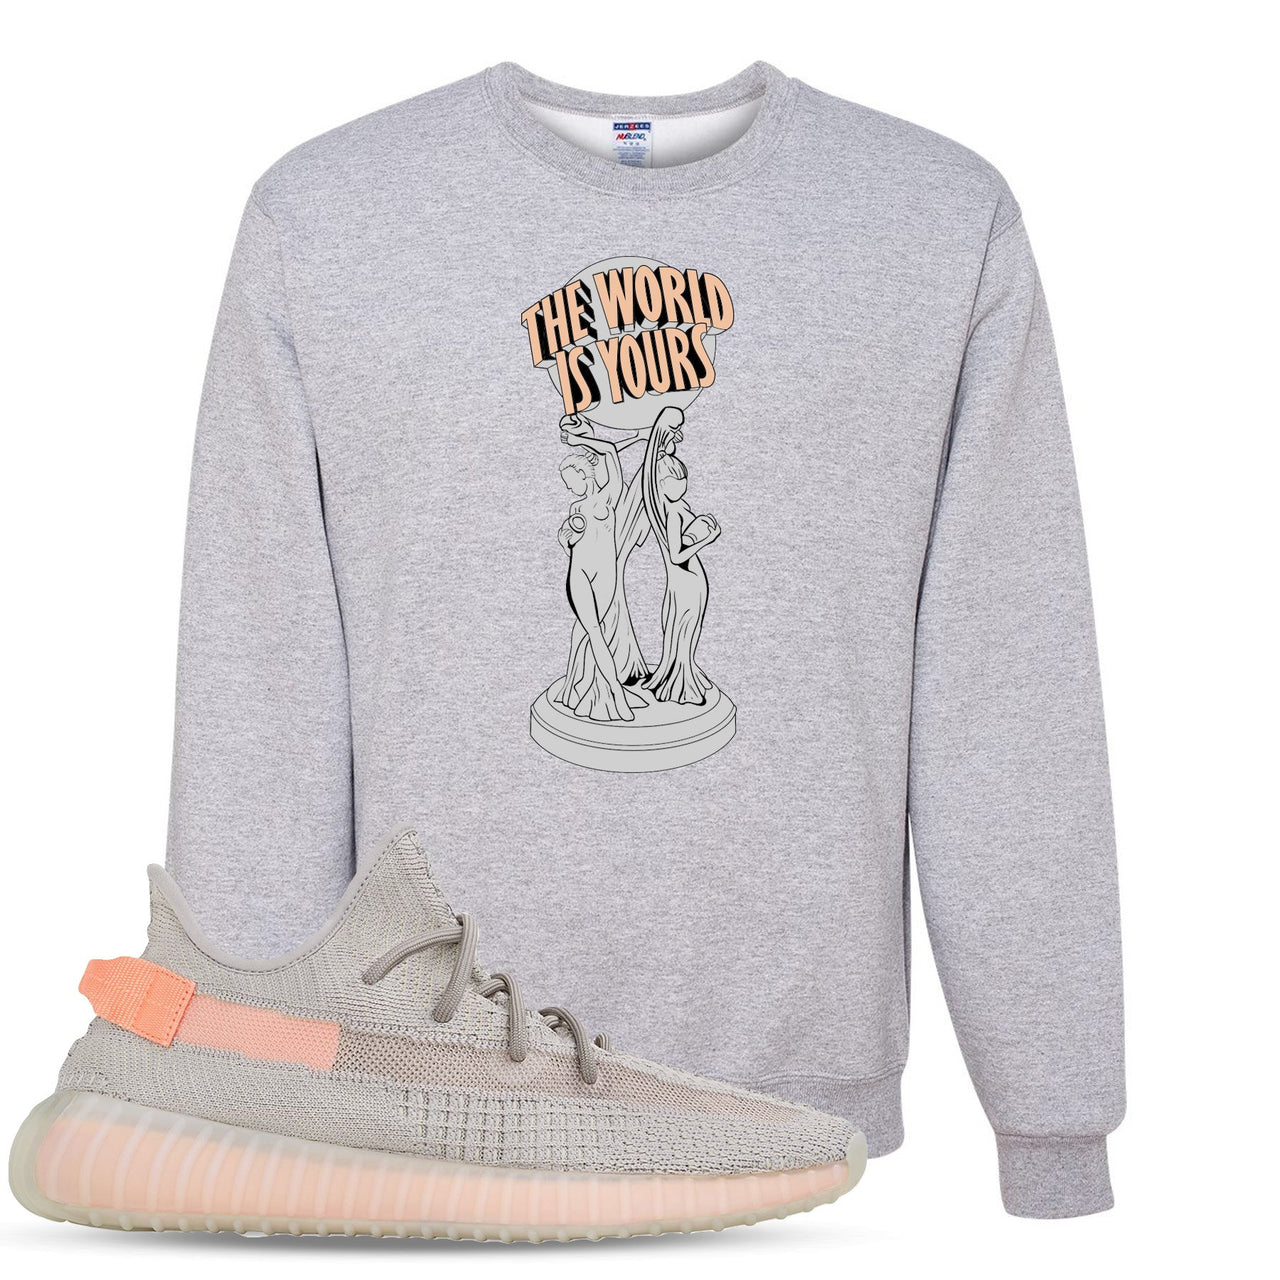 True Form v2 350s Crewneck Sweater | The World Is Yours, Heathered Light Gray